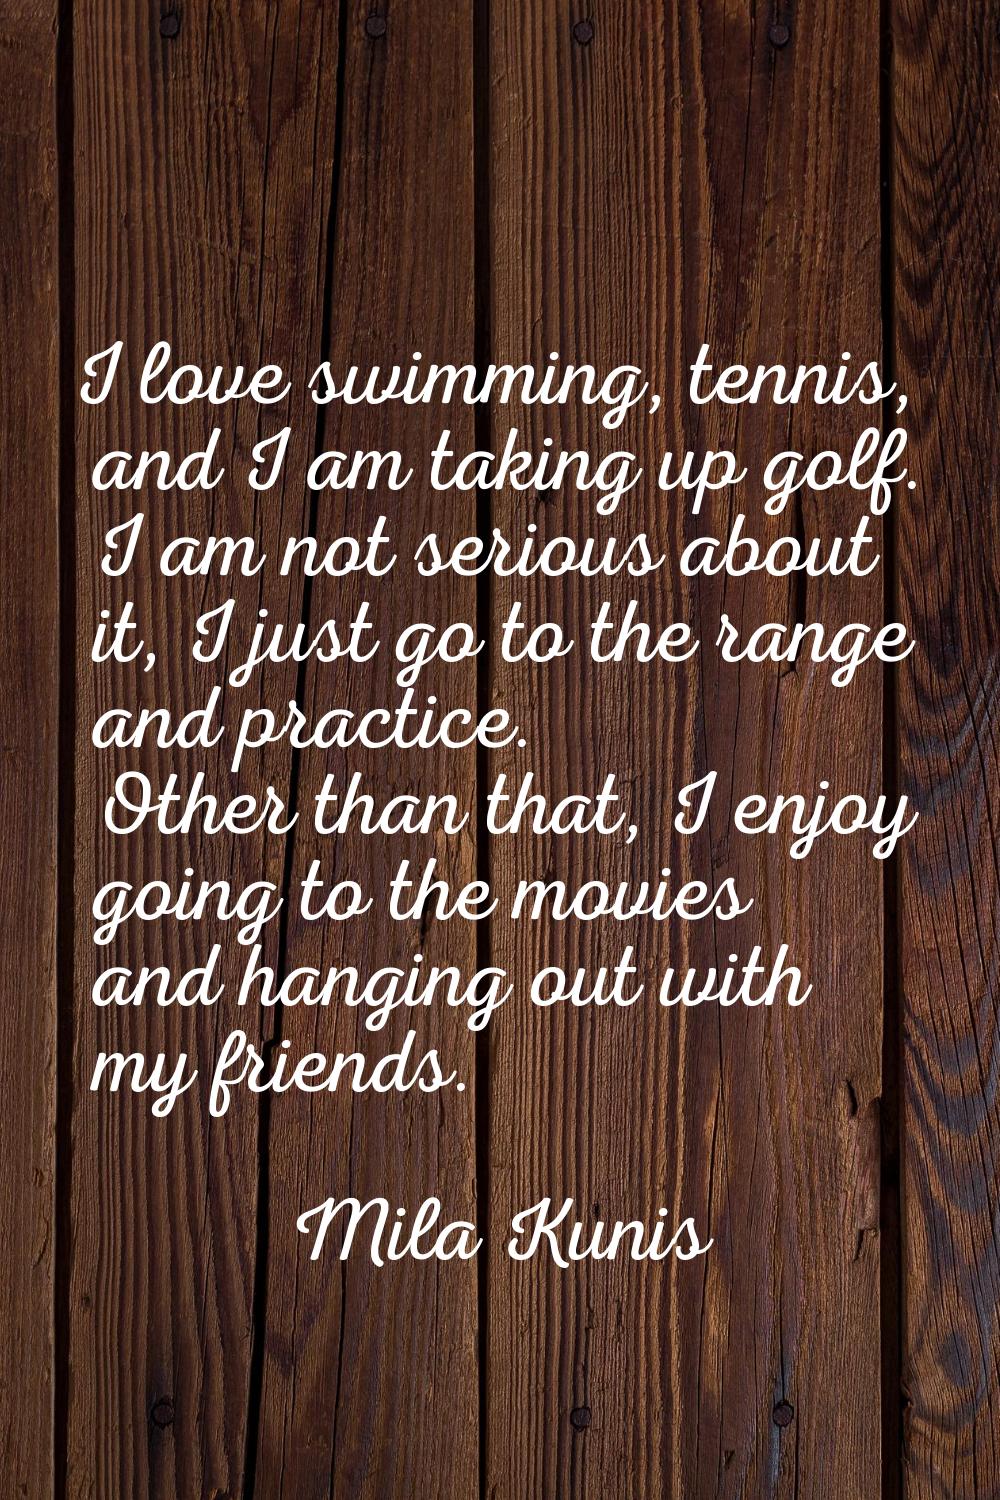 I love swimming, tennis, and I am taking up golf. I am not serious about it, I just go to the range